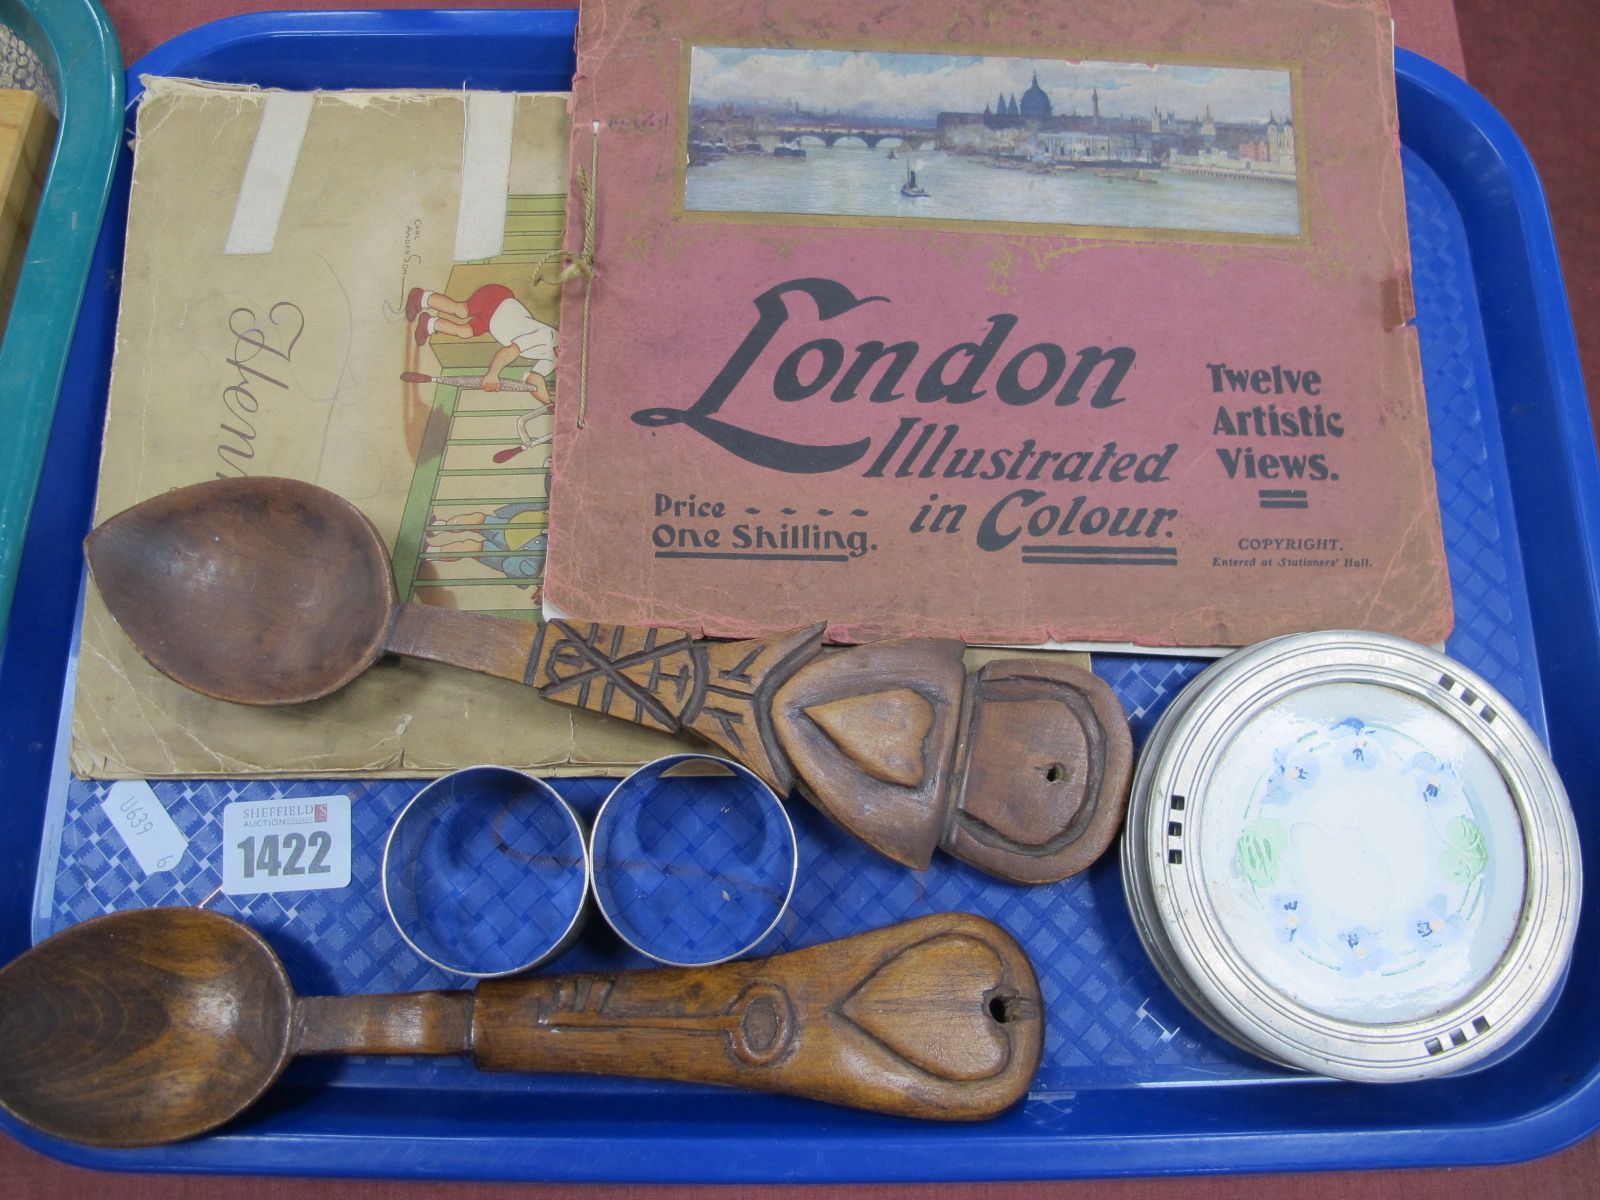 Two Silver napkin Rings, love spoons, Geschutz coasters, Wix cigarette cards, London Views booklet:-